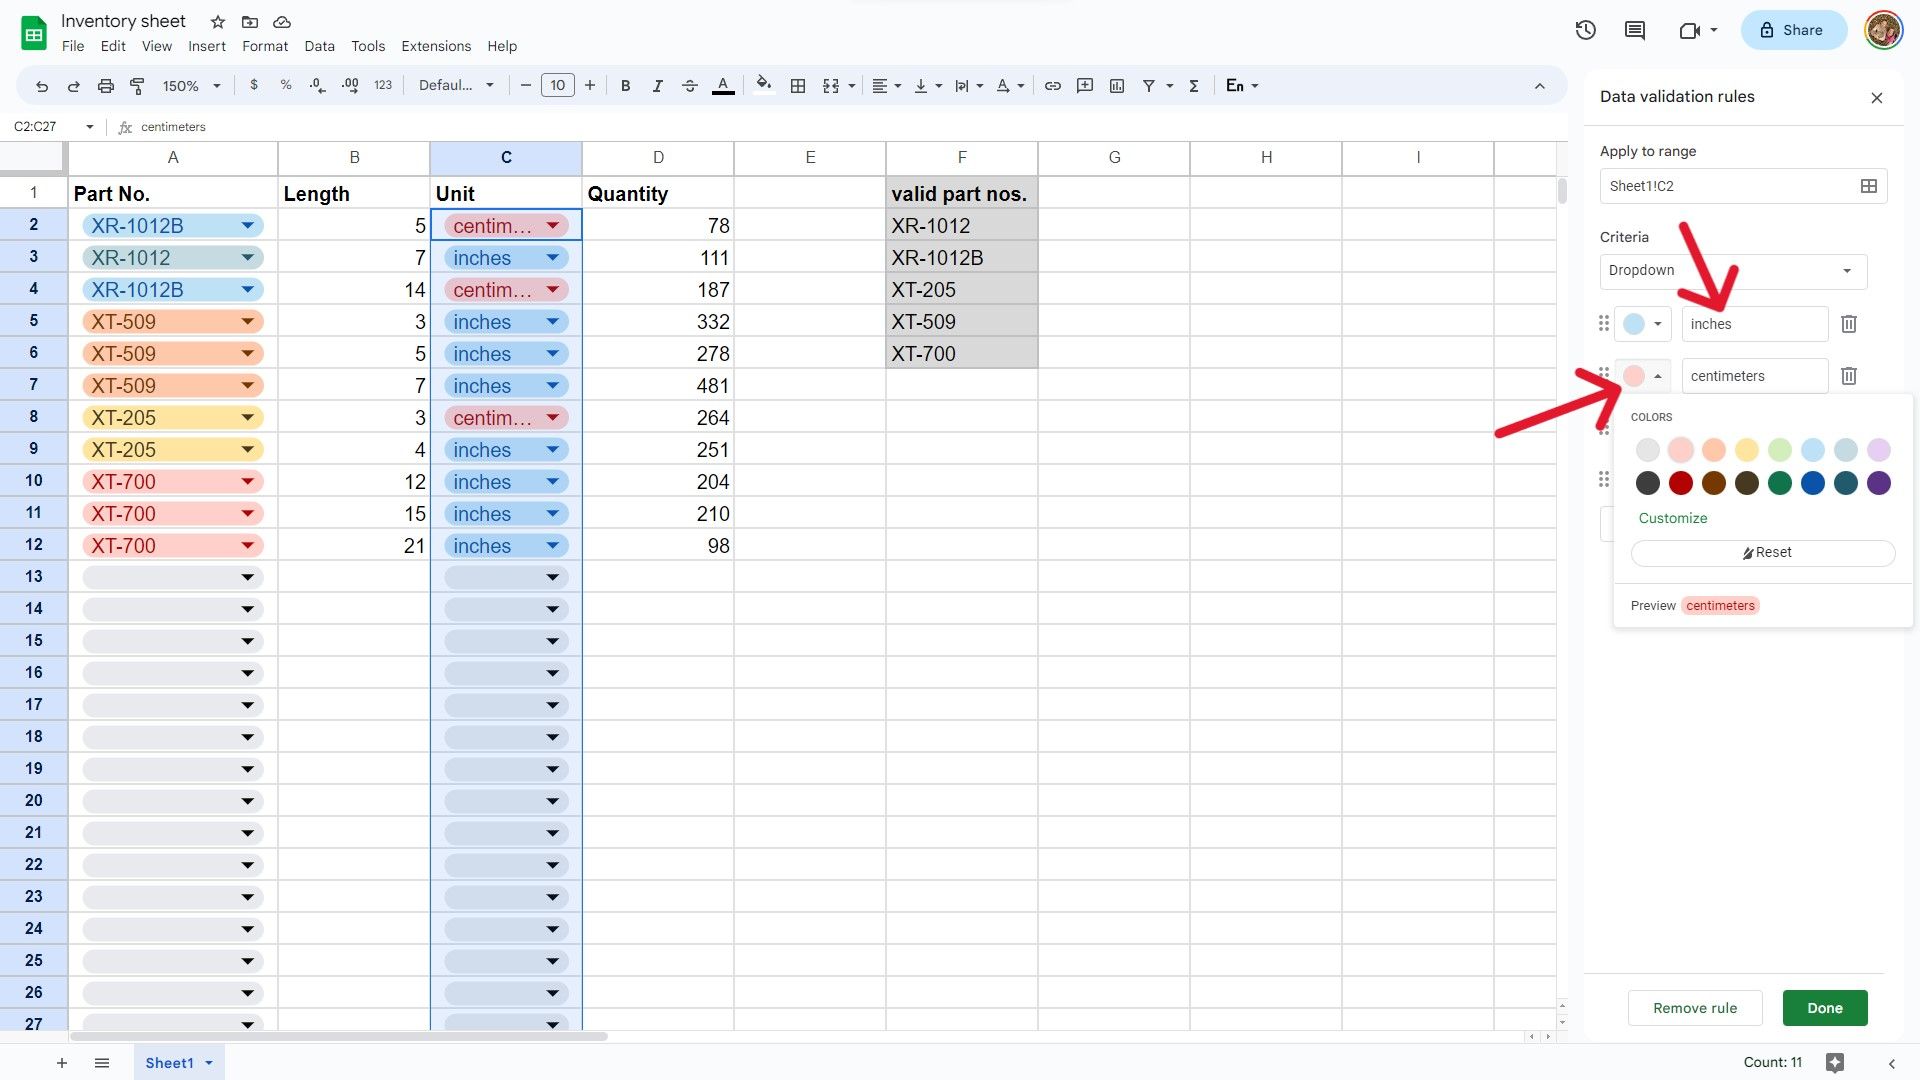 A screenshot of a Google Sheets document showing dropdown names and colors.